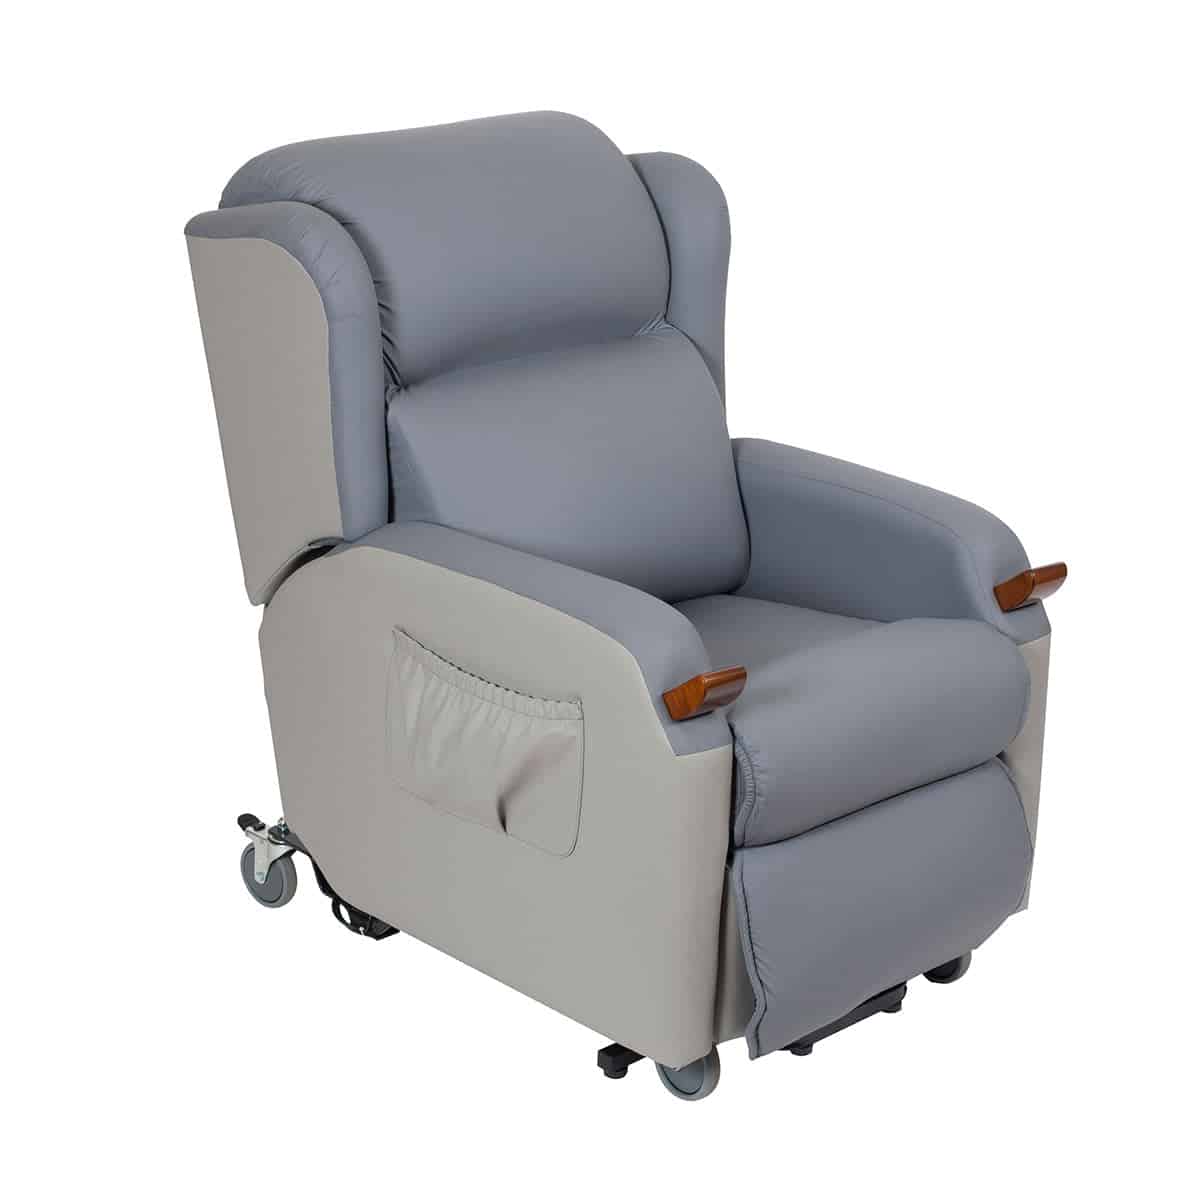 Air Comfort Mobile Compact Lift Chair (CarrEx) – Single or Twin Motor